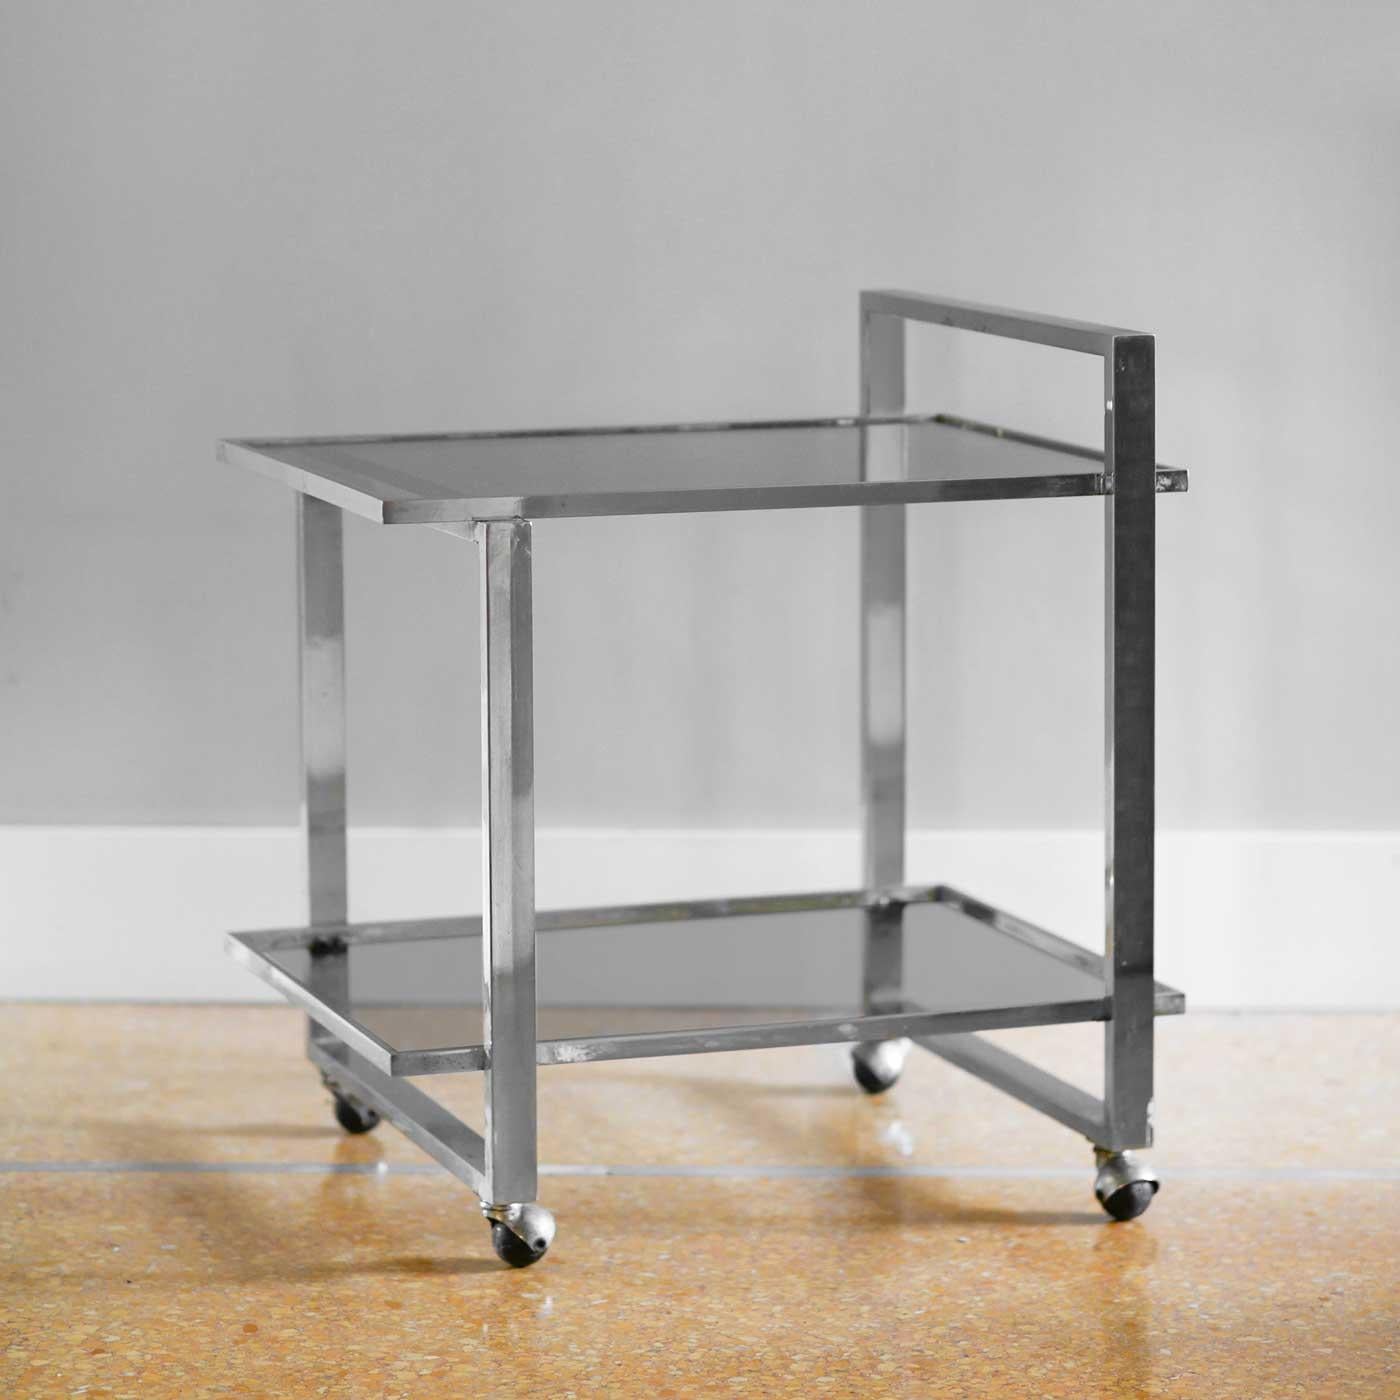 Metal bar trolley with smoked glass shelves.
Product details
Dimensions: 71 W x 77 H x 60 D cm
Materials: metal, smoked glass
Production: Italian manufacture 1970.